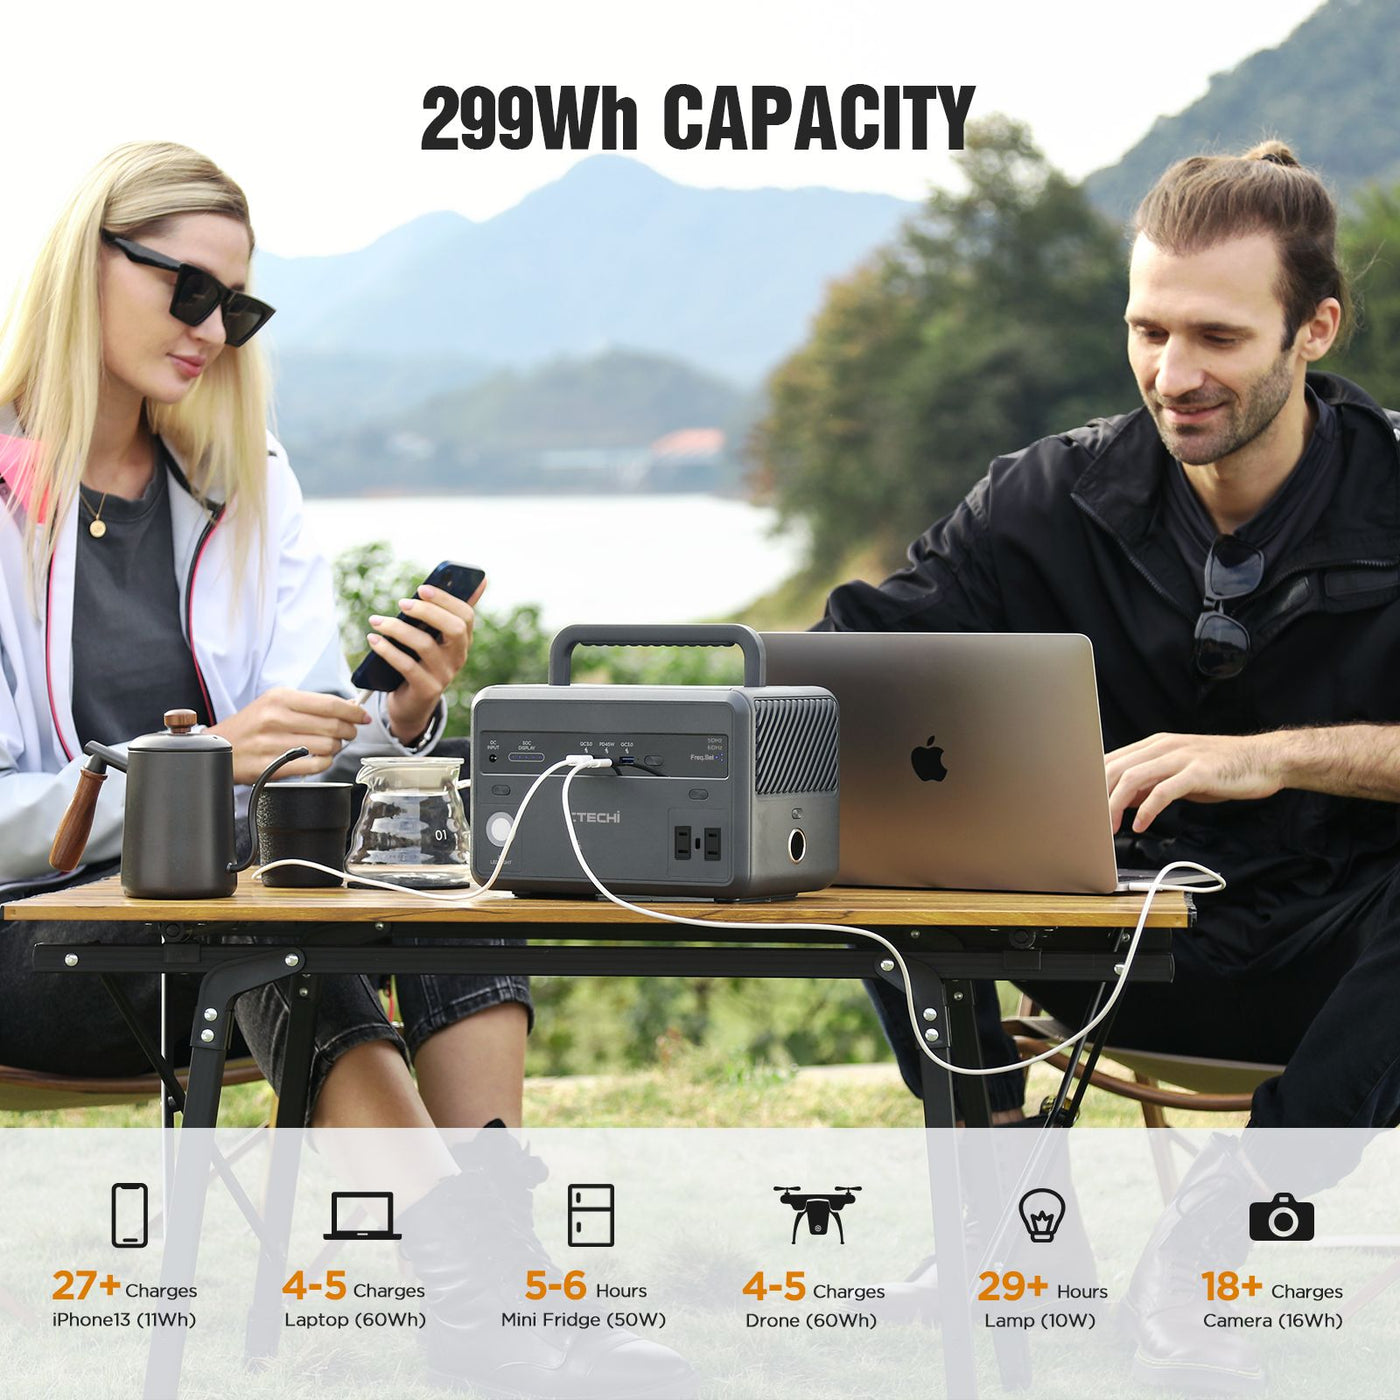 【Refurbished】CTECHi GT300 Portable Power Station 300W / 299Wh LiFePO4 Battery